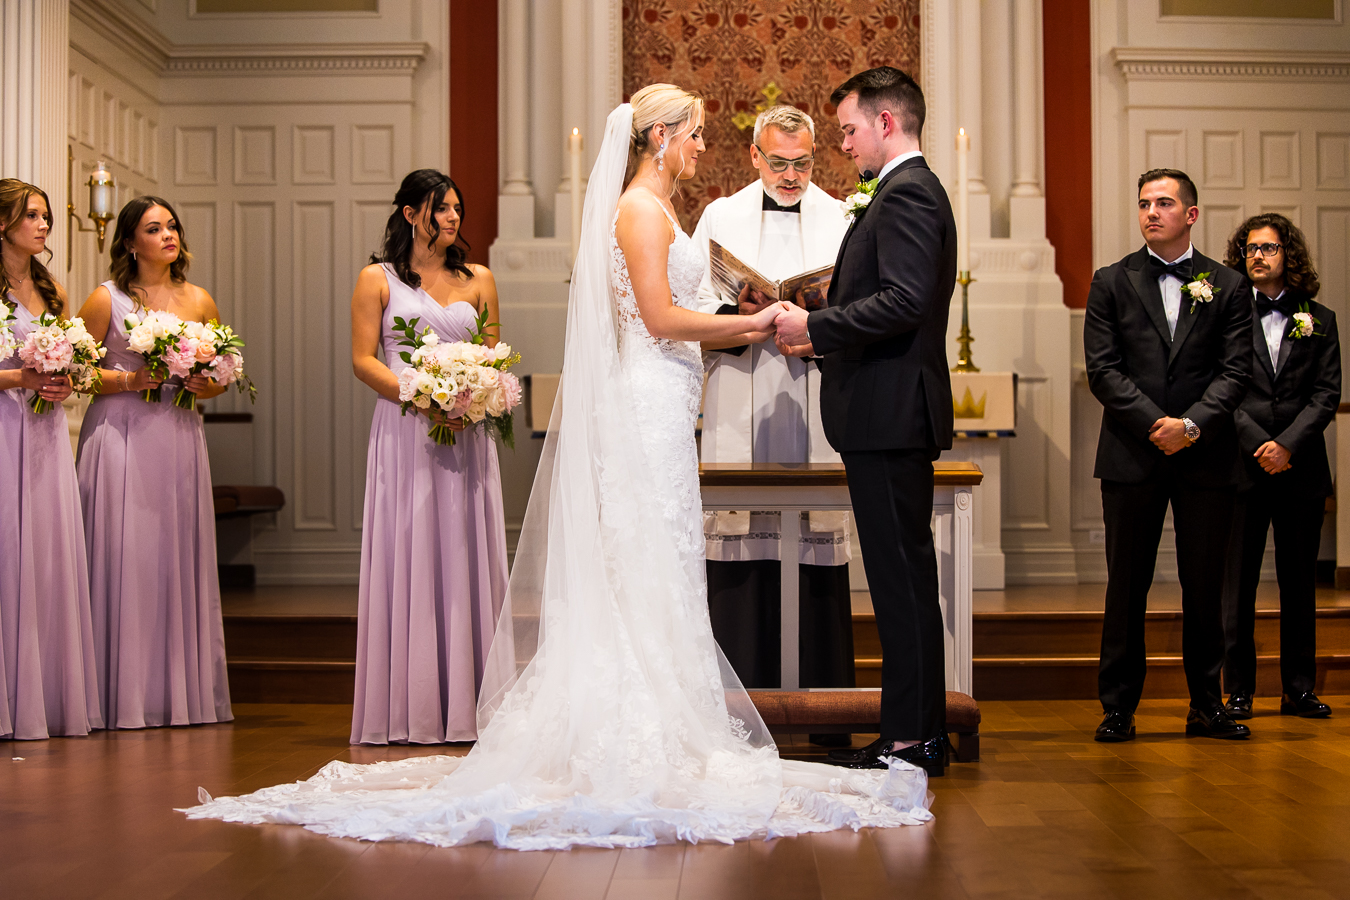 best pa wedding photographer, lisa rhinehart, captures this traditional image of the bride and groom holding hands during their wedding ceremony with their wedding party behind them 